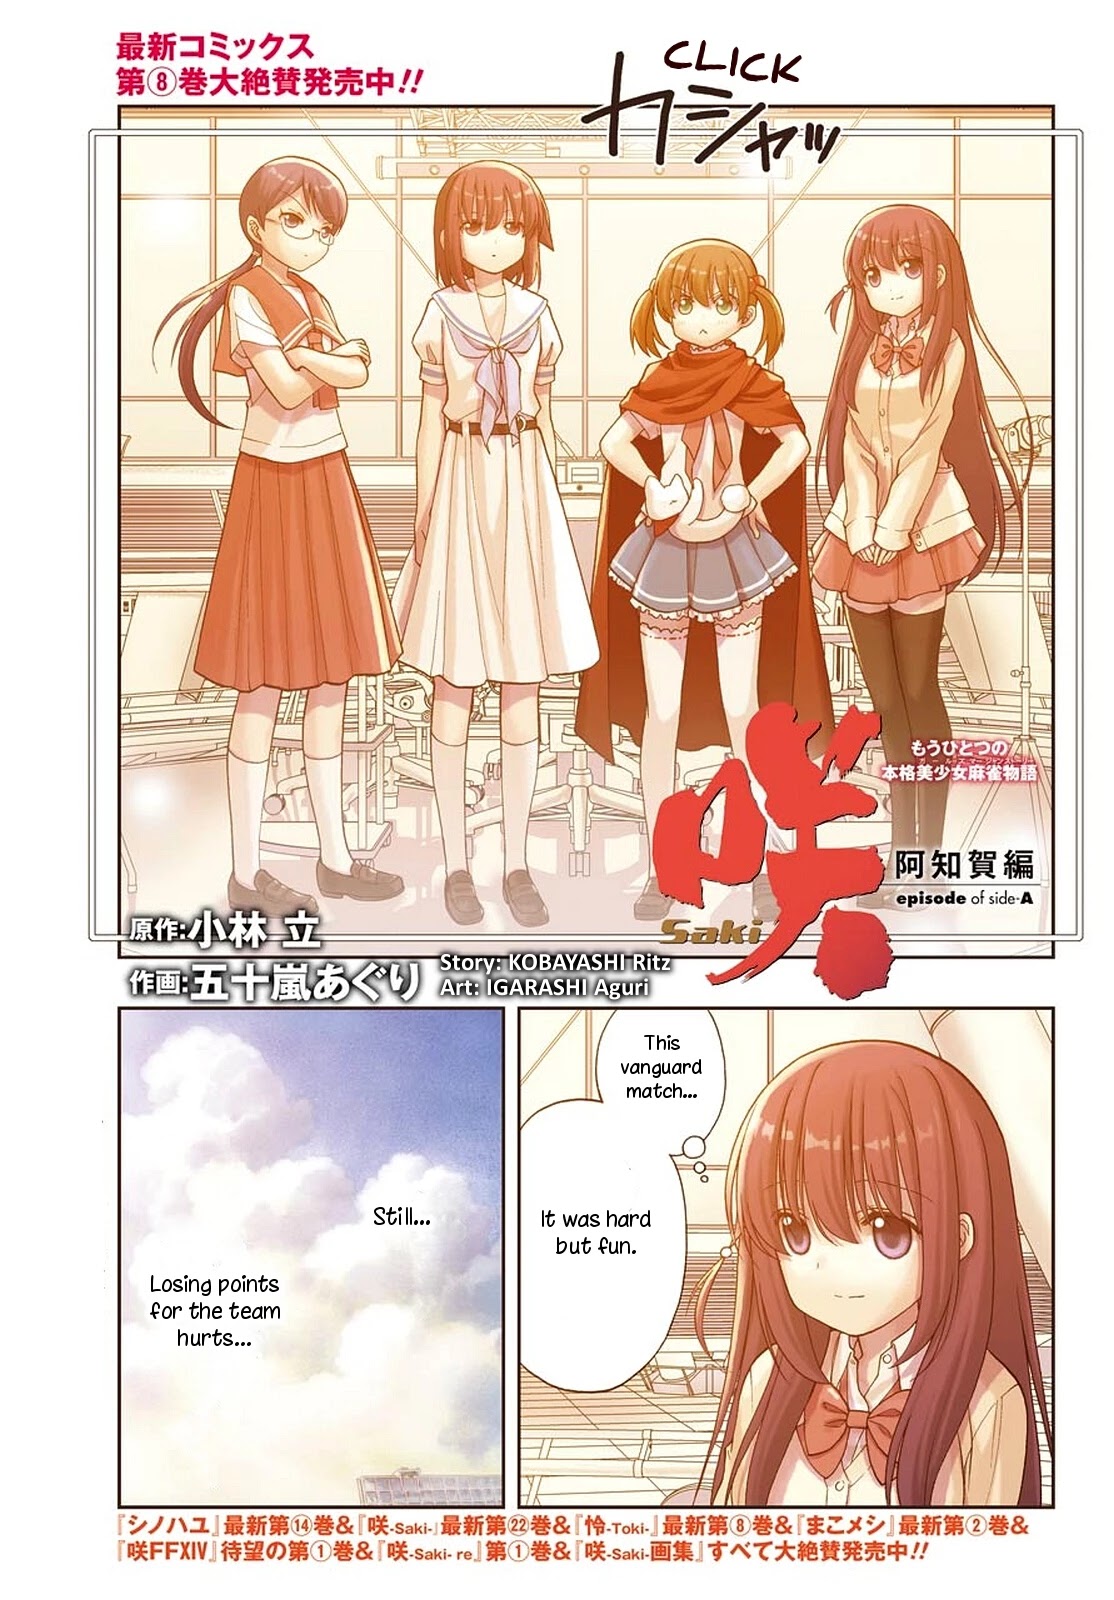 Saki: Achiga-Hen - Episode Of Side-A - New Series Chapter 36